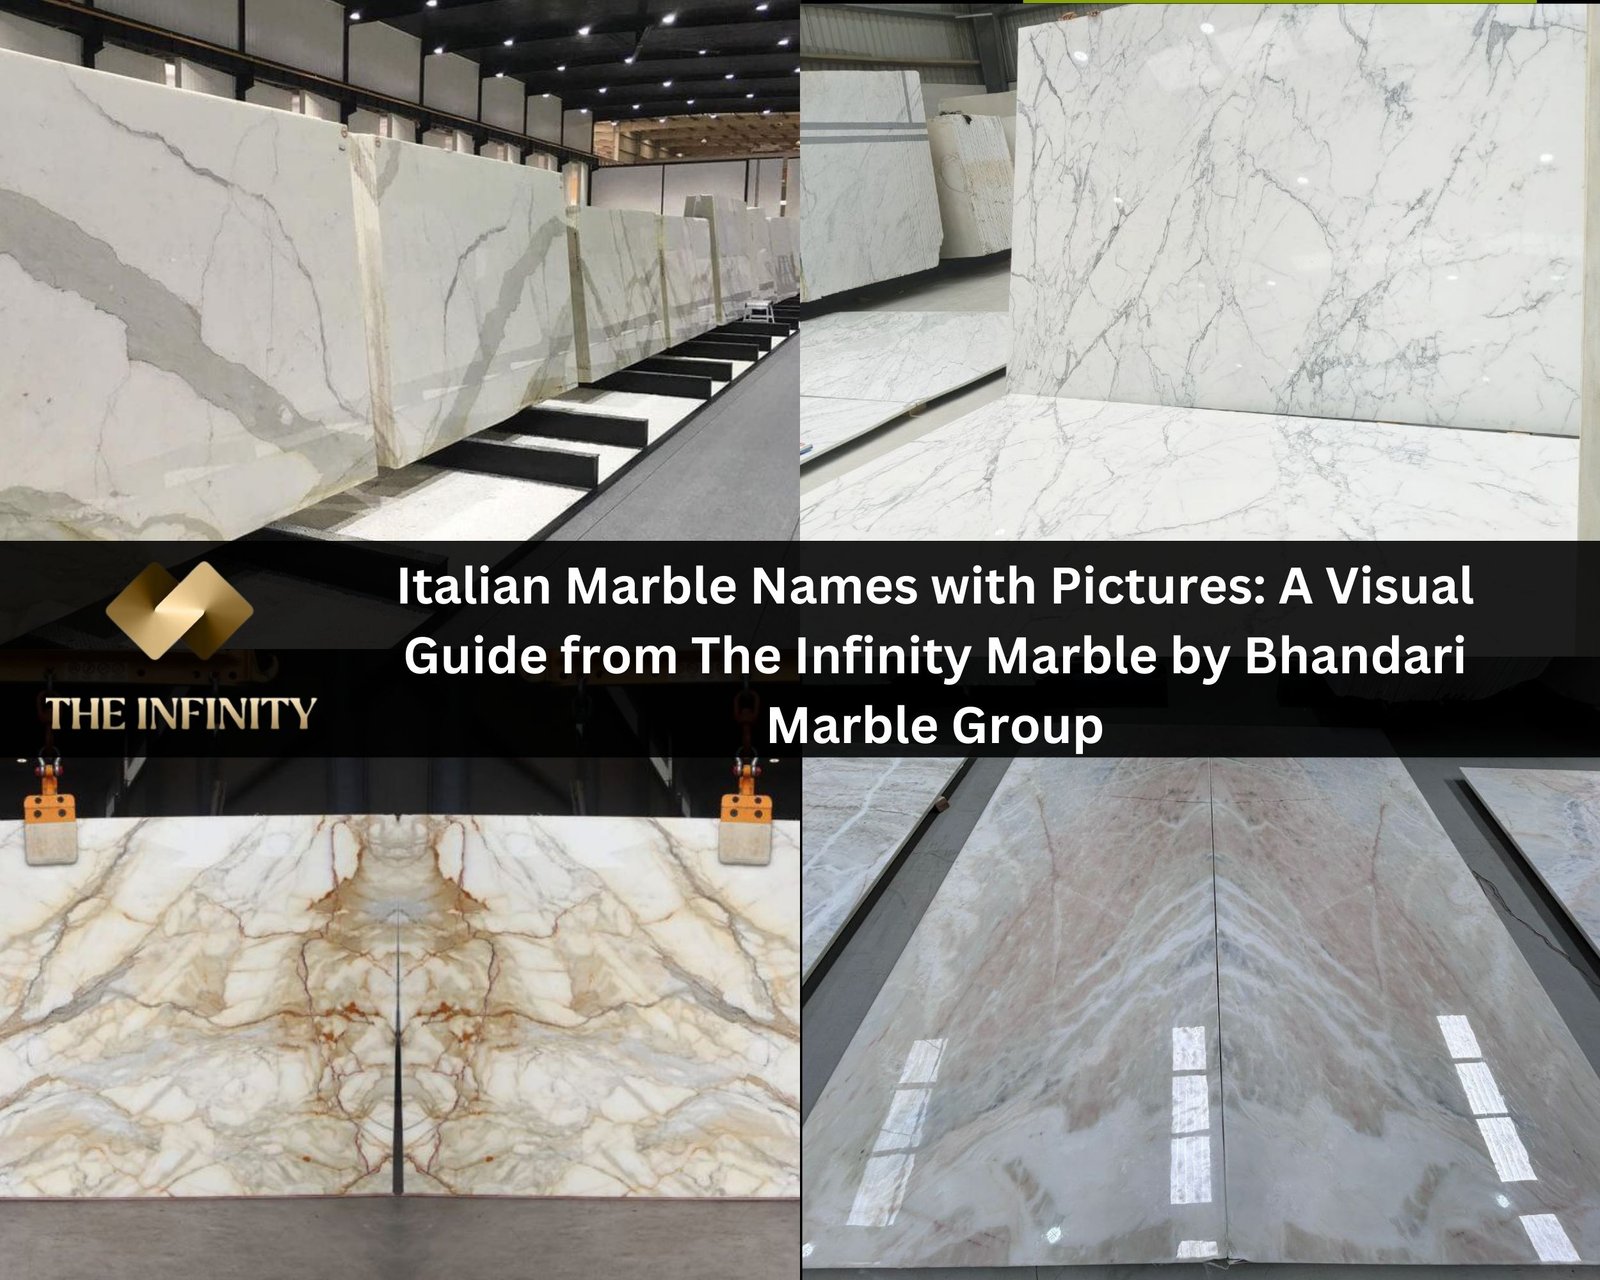 Italian Marble Names with Pictures: A Visual Guide